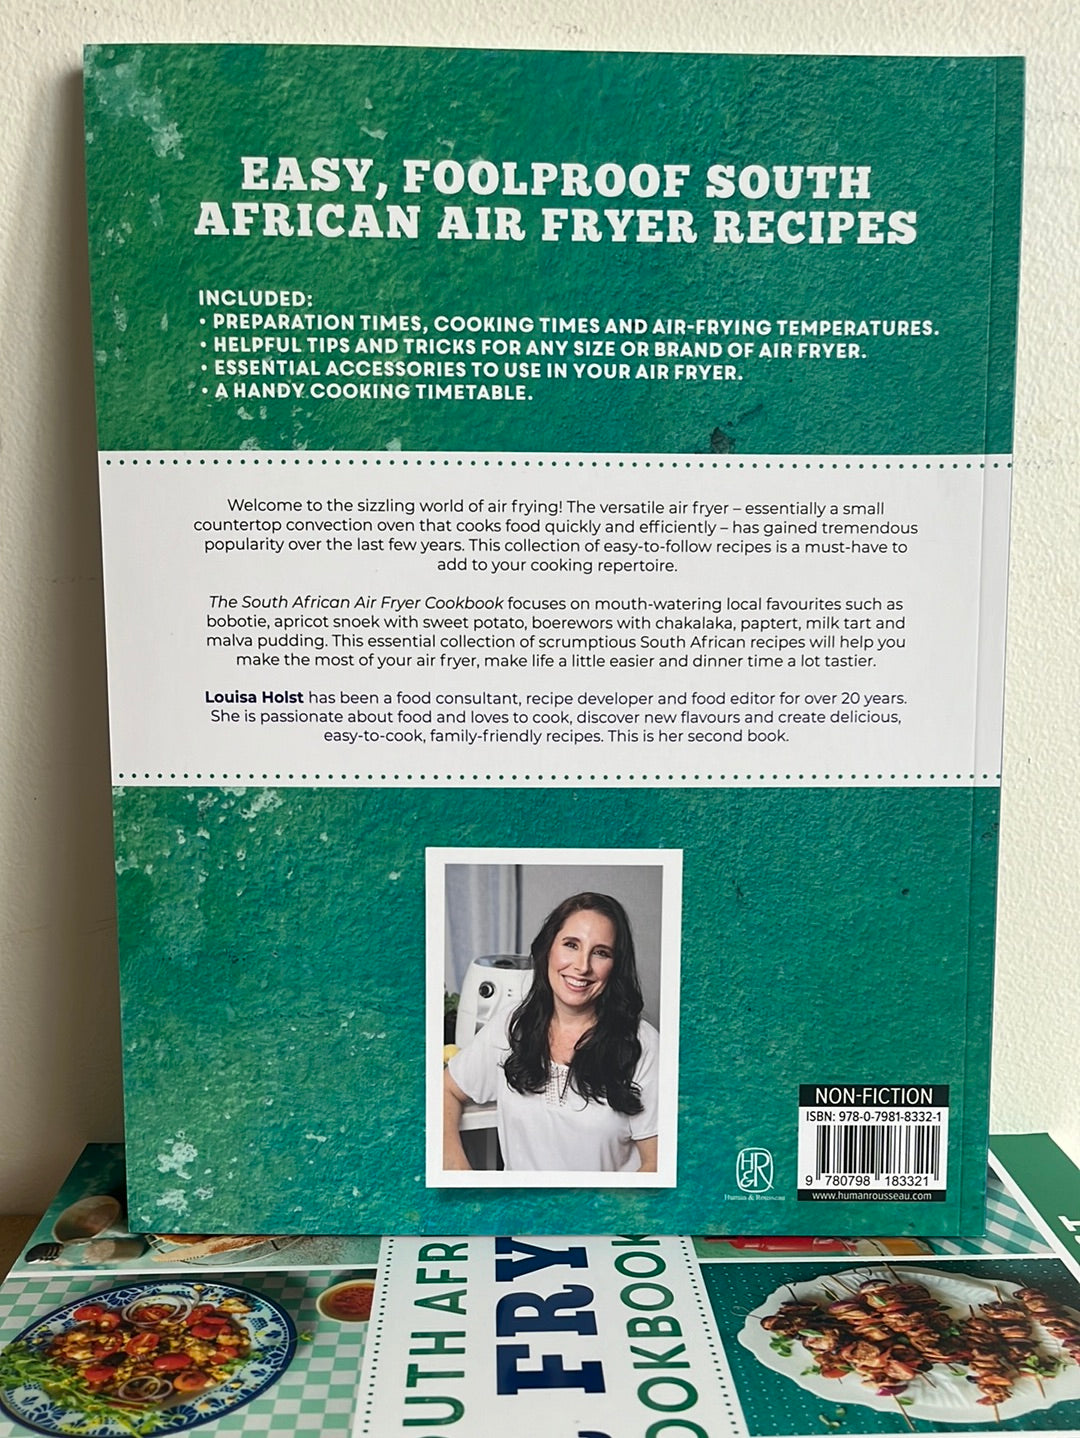 The South African Air Fryer Cookbook